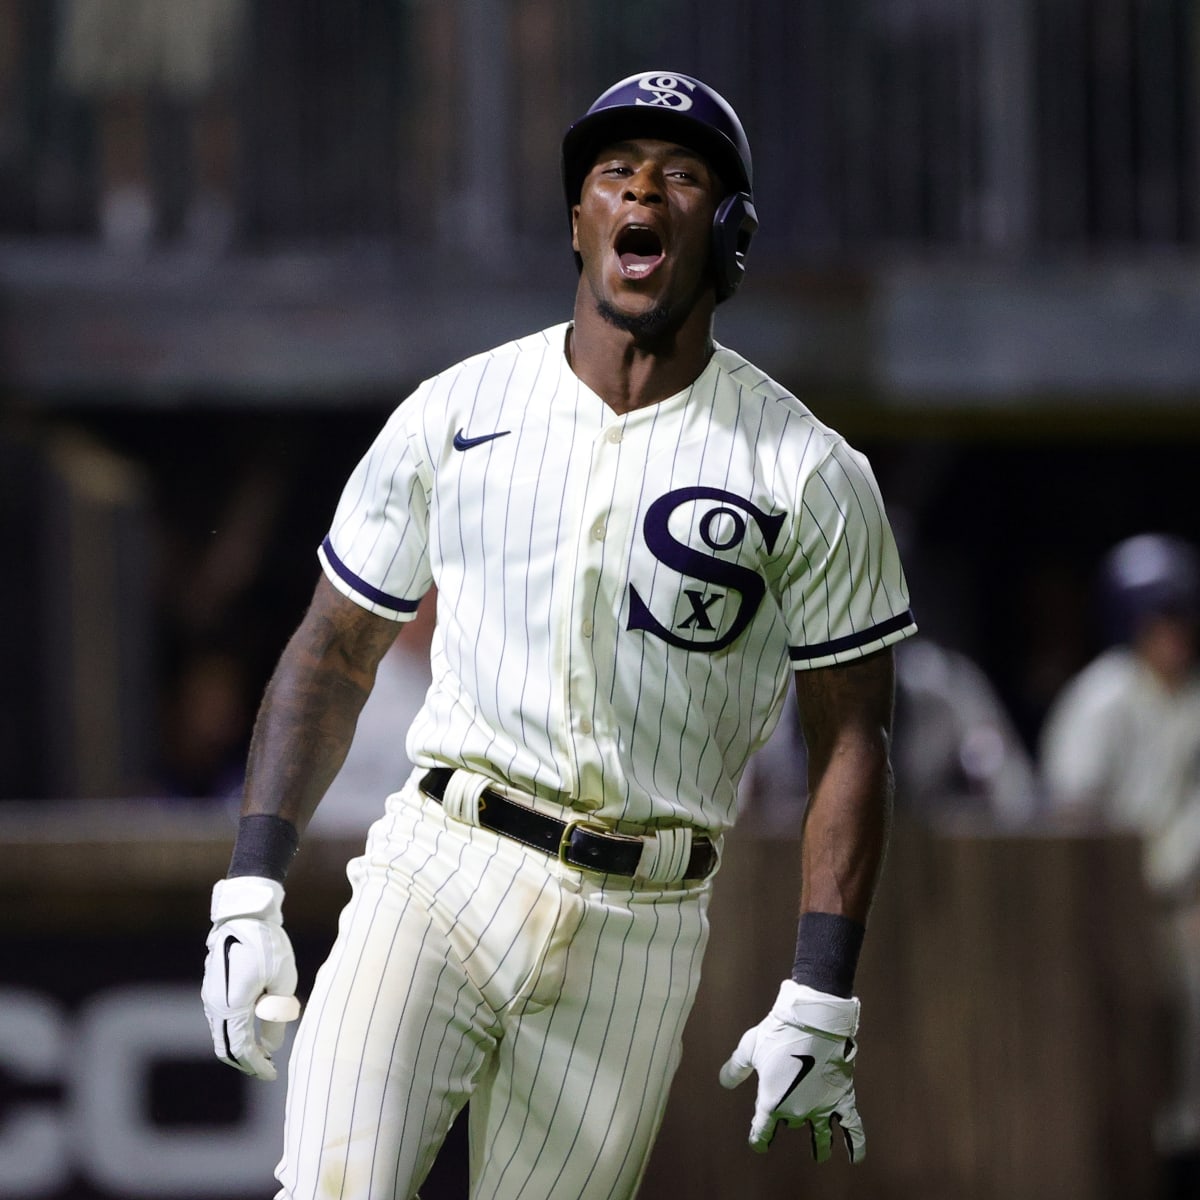 Field of Dreams game: Tim Anderson hits walk-off homer, White Sox rally to  defeat Yankees - Chicago Sun-Times